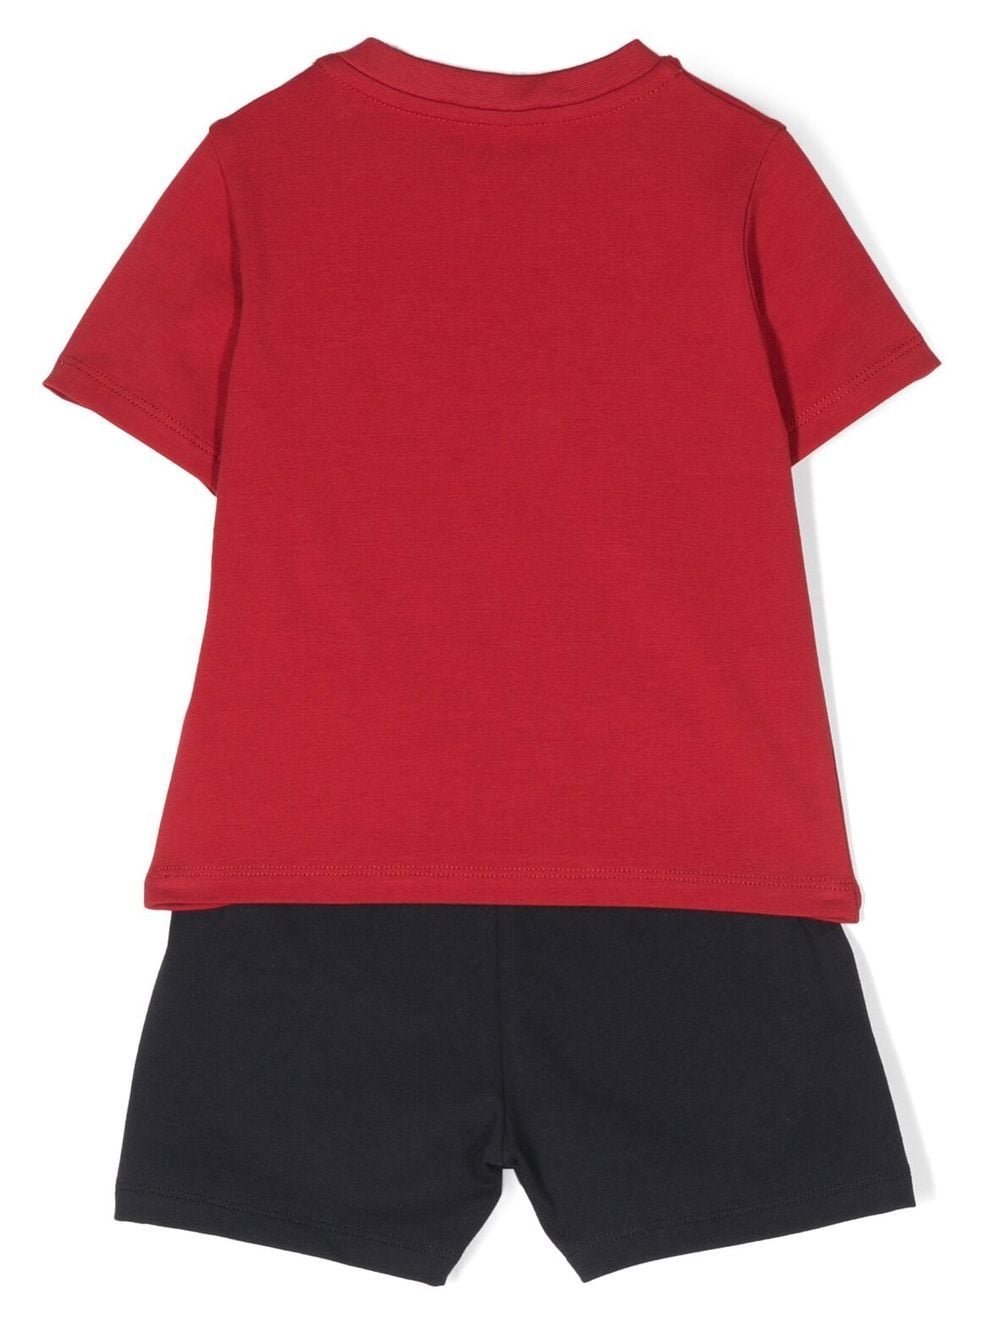 Red and blue sports outfit for newborns